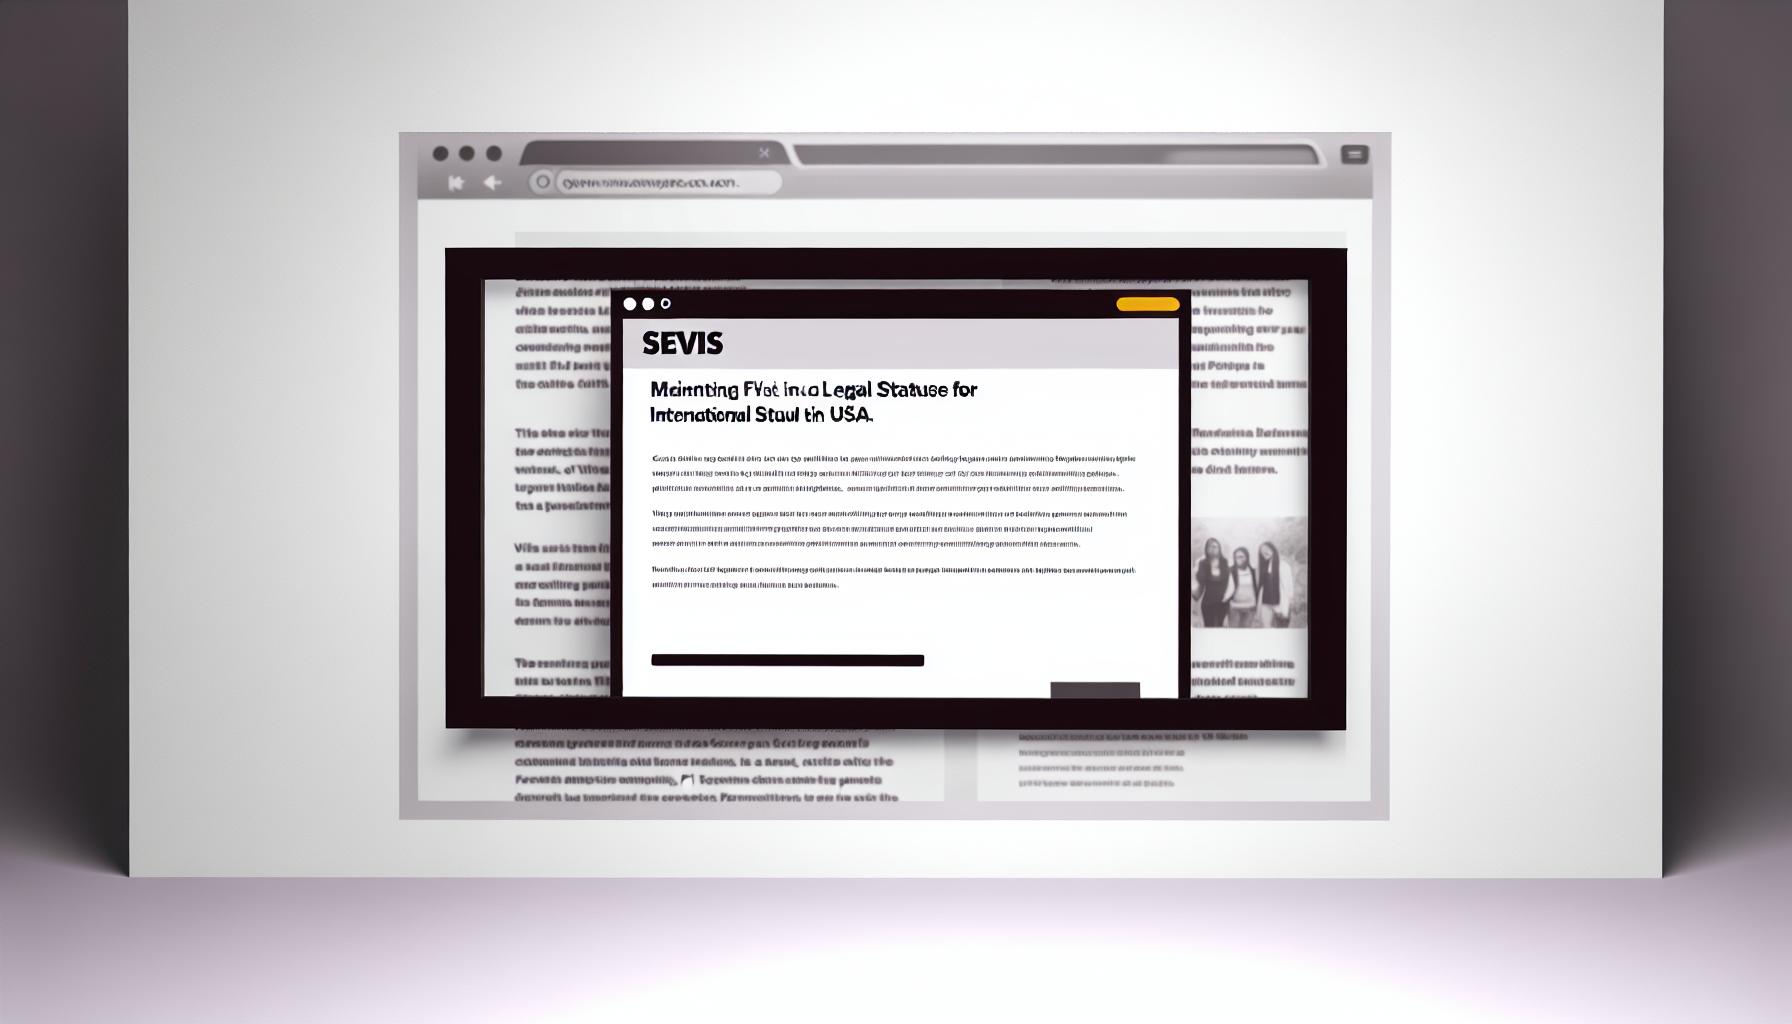 An iframe with text about SEVIS, F1 Visa guidelines, and maintaining legal status for international students in the US displayed on a webpage